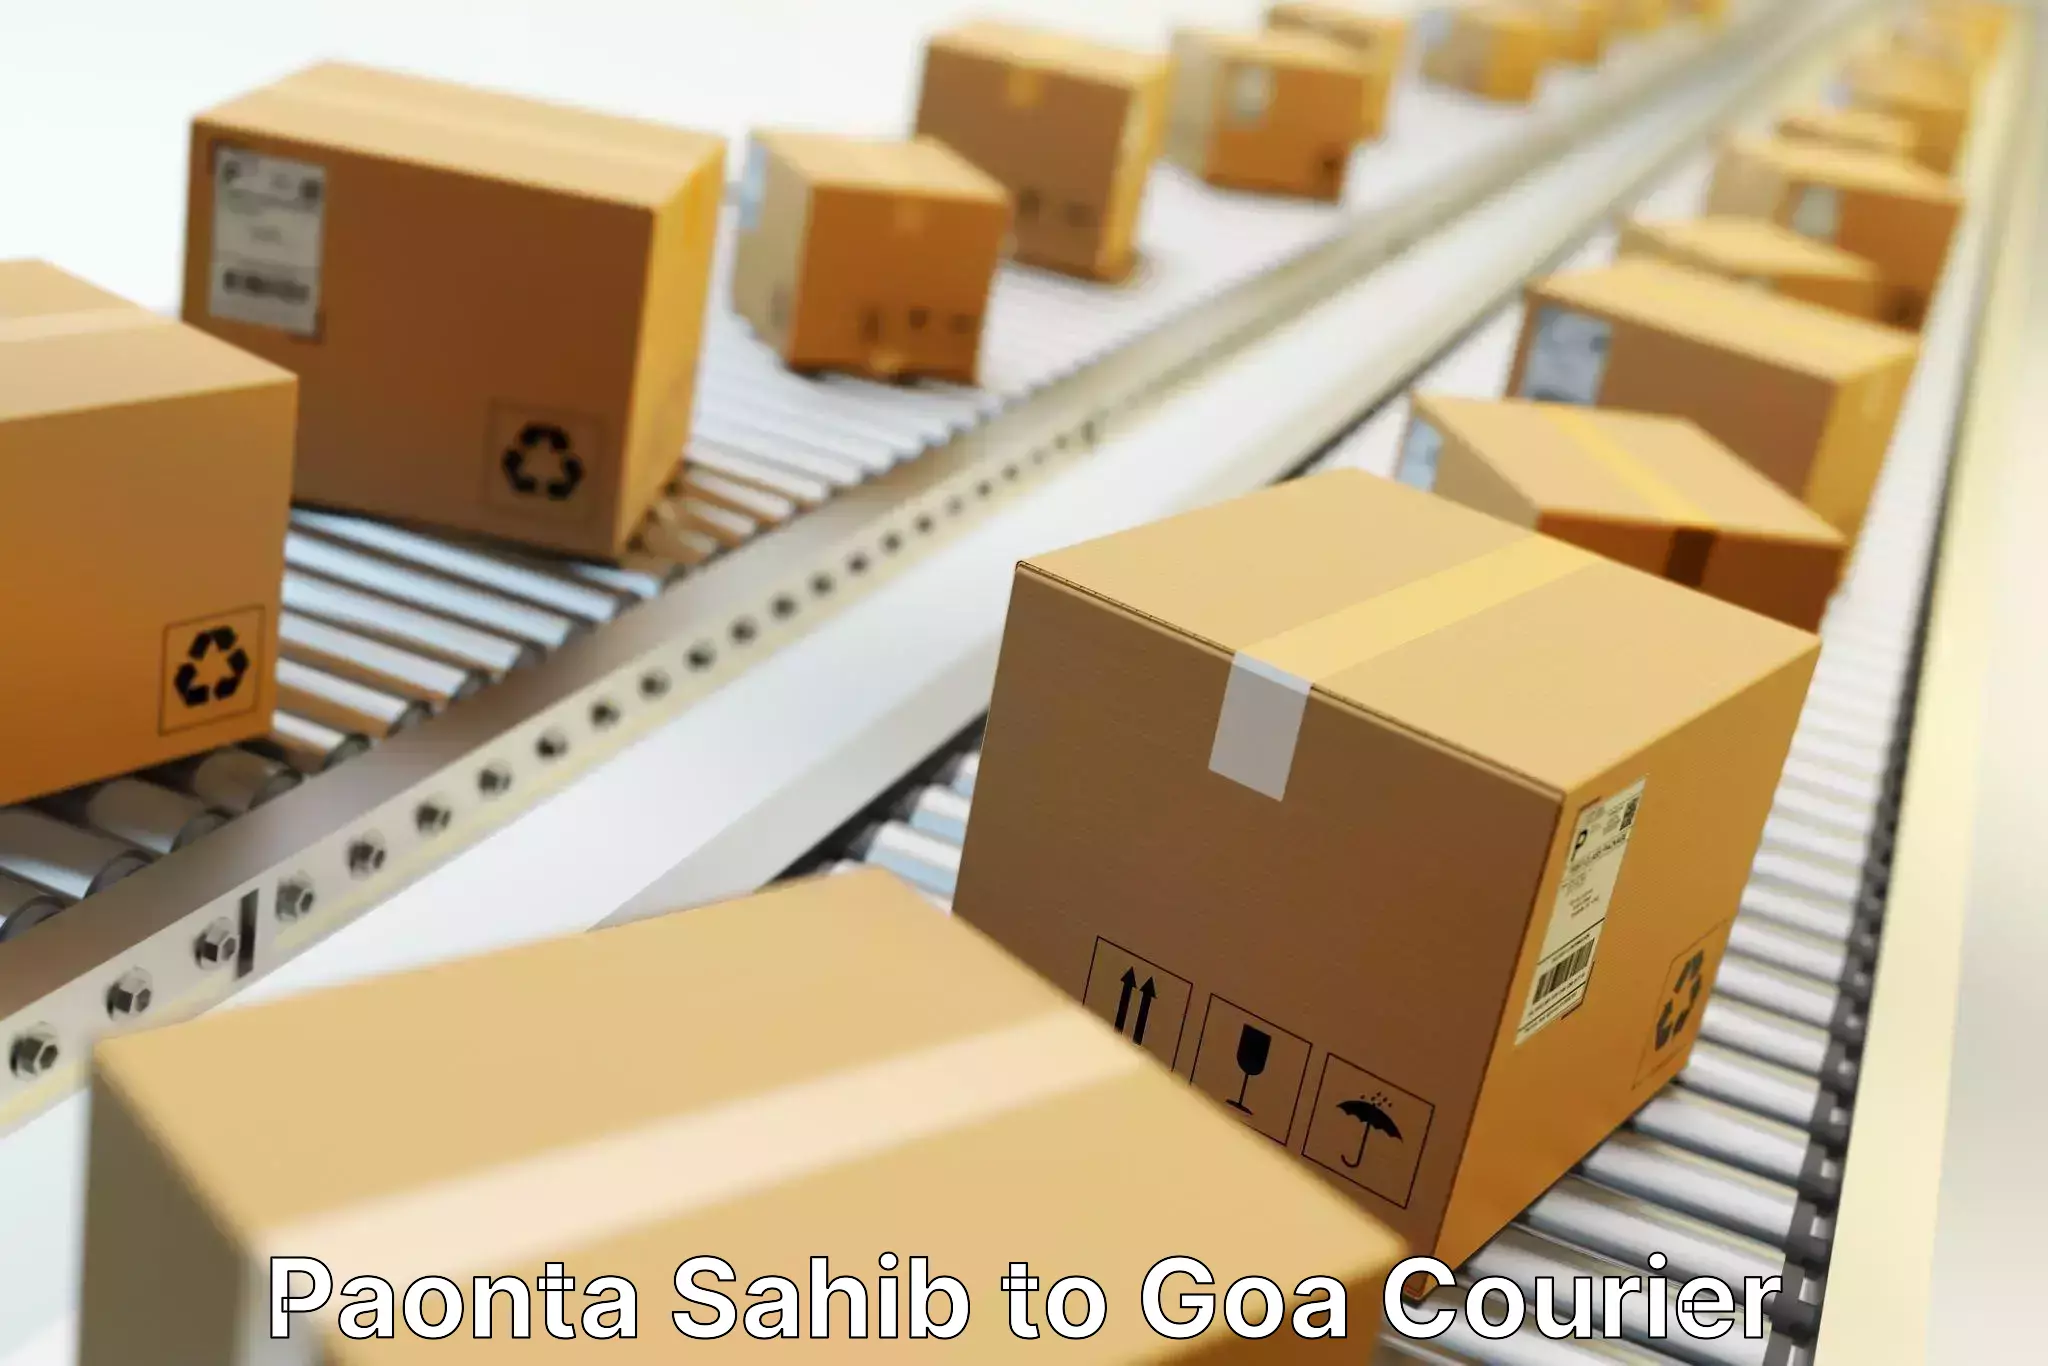 Package delivery network Paonta Sahib to Panaji